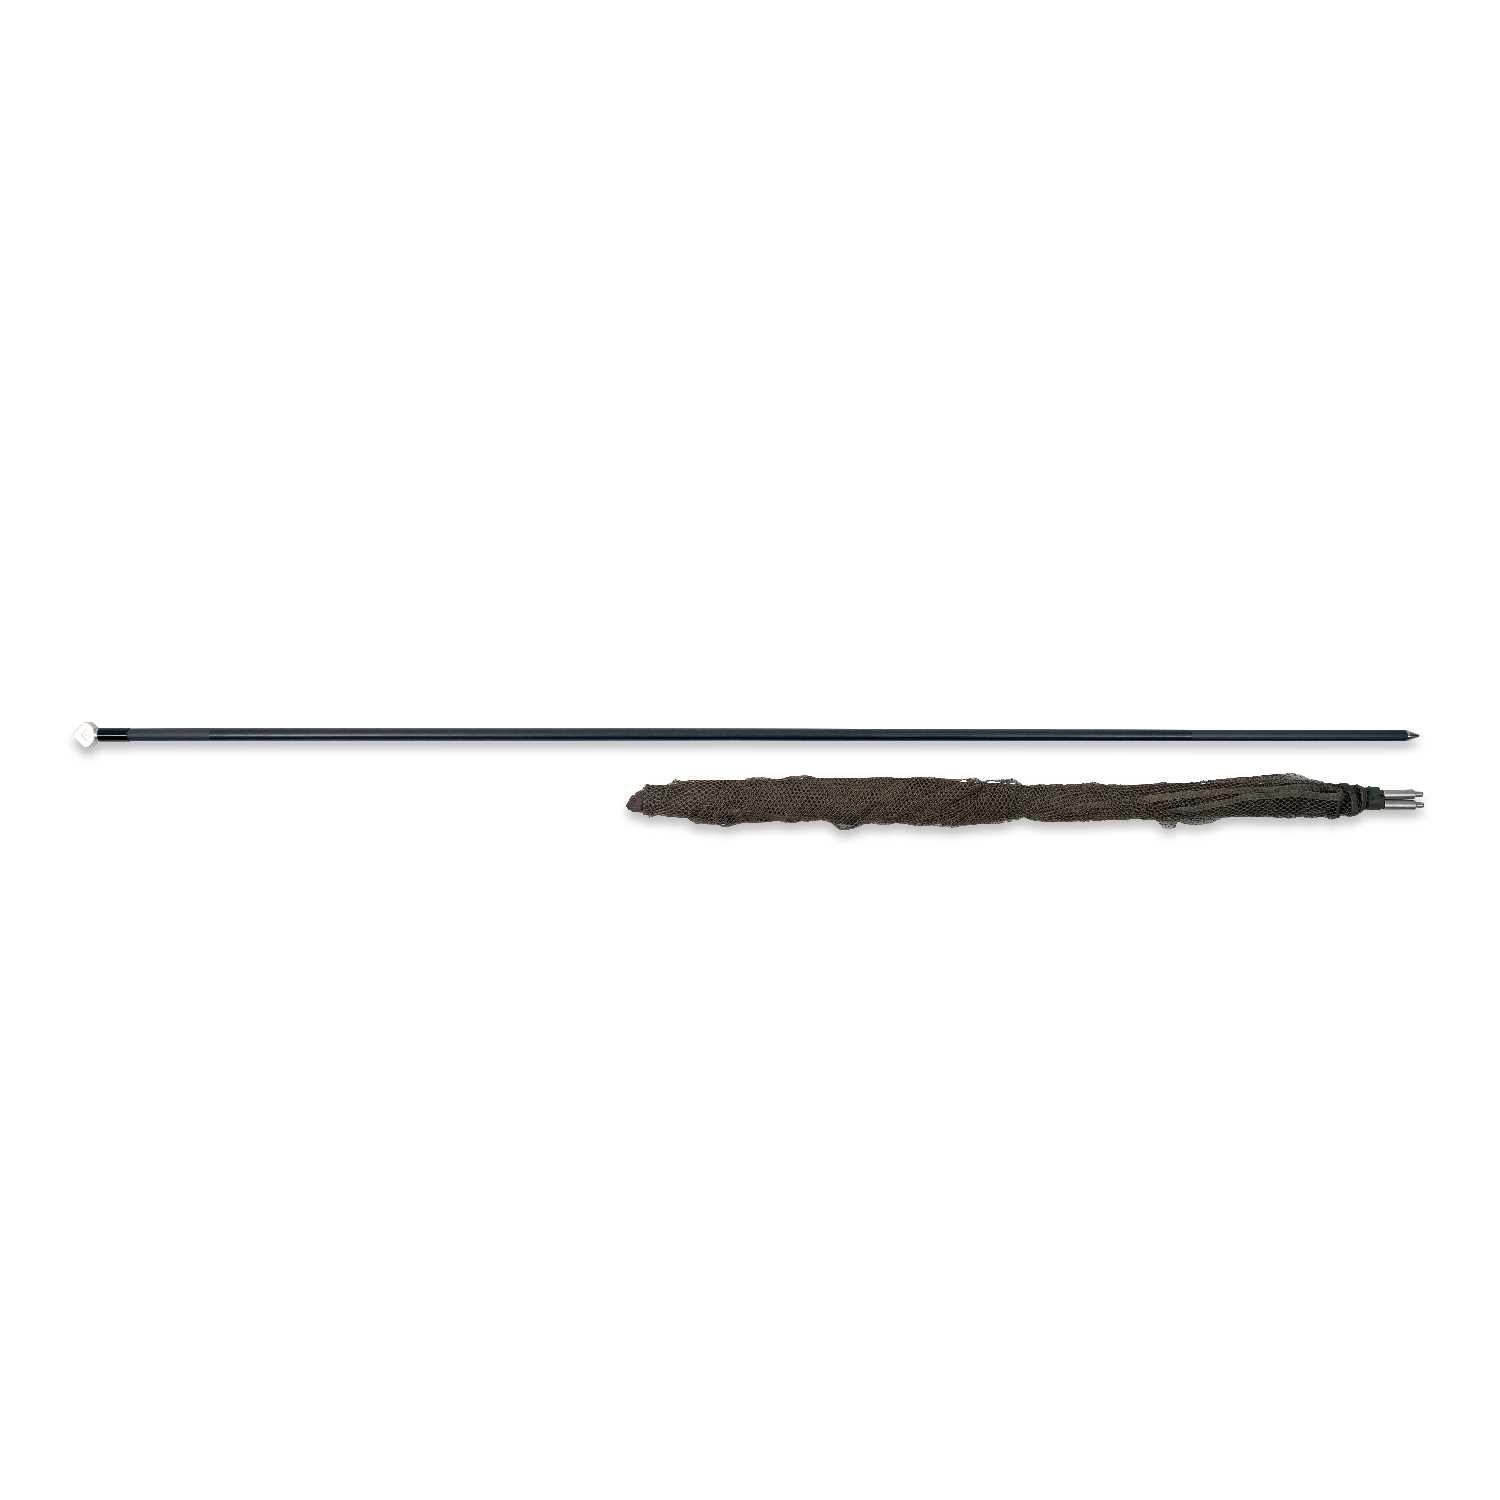 Avid PRO-Tect Net 6ft 1 pc – The Angling Store